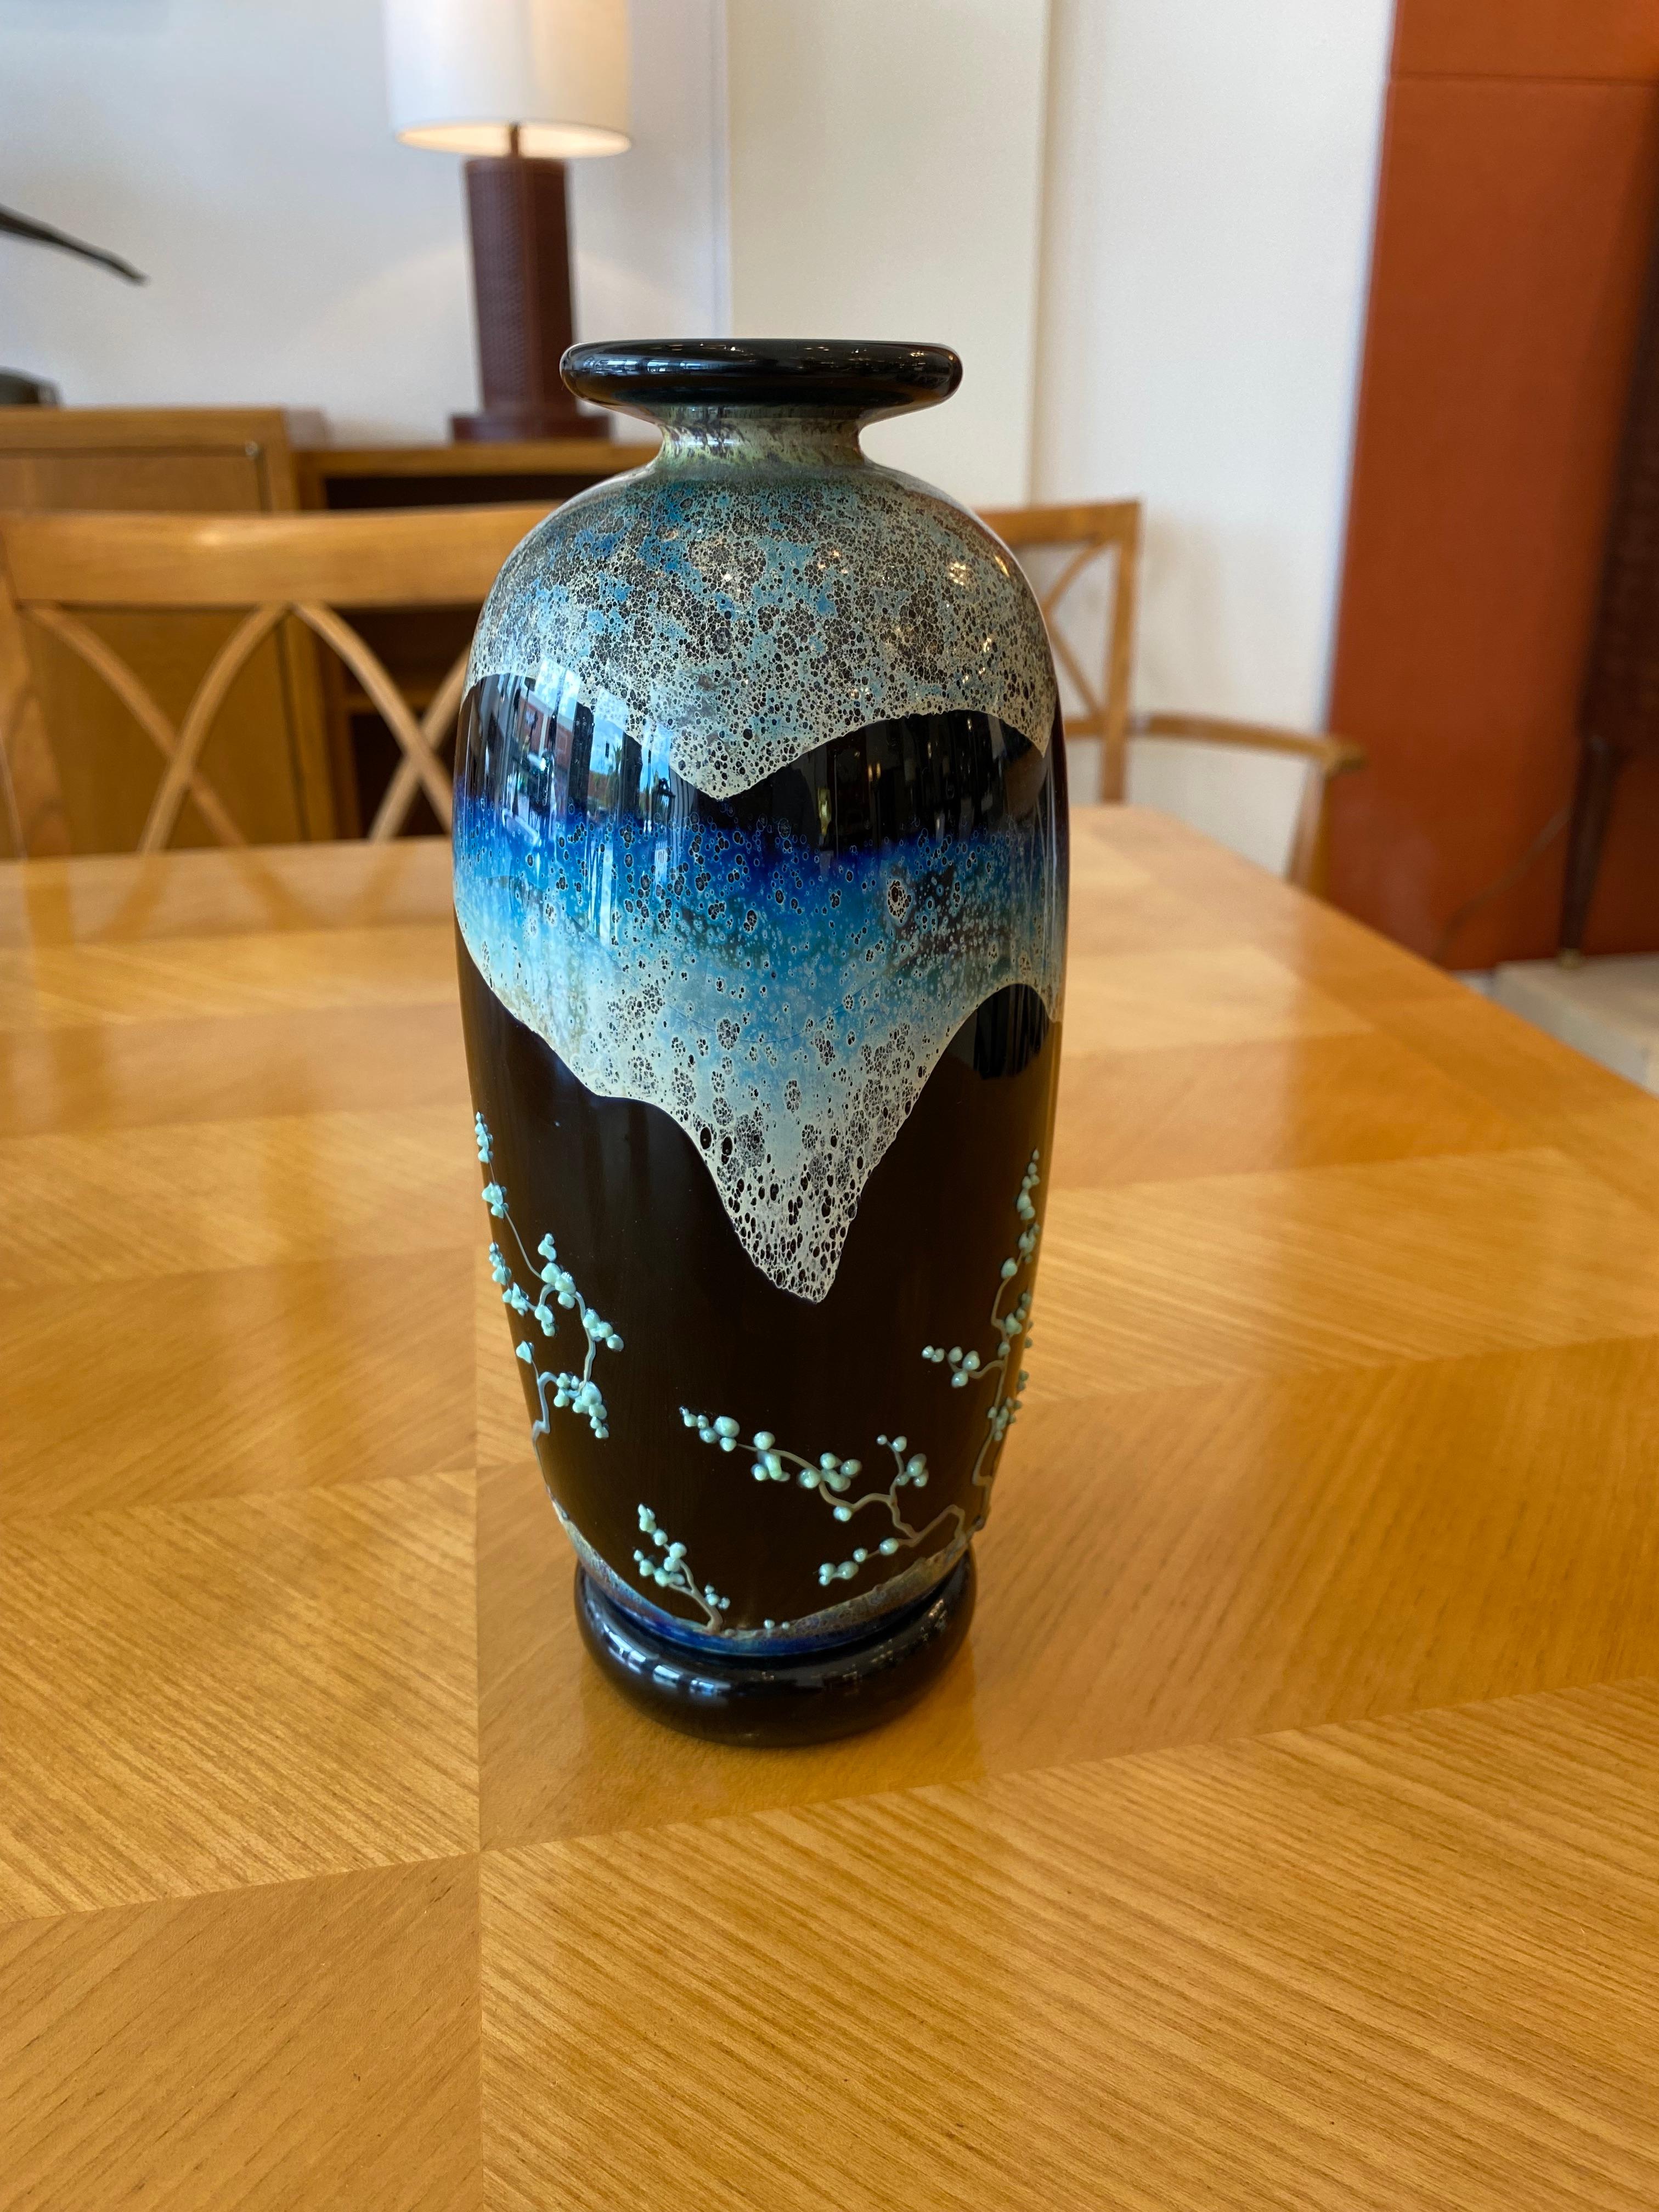 A beautiful glass vase in blue hues signed by John Nygren.
Dated 1981.
Made in the USA.
John Nygren is a senior member of the North Carolina glass art community and a renowned American master. Throughout his 40 year career, love of nature and the